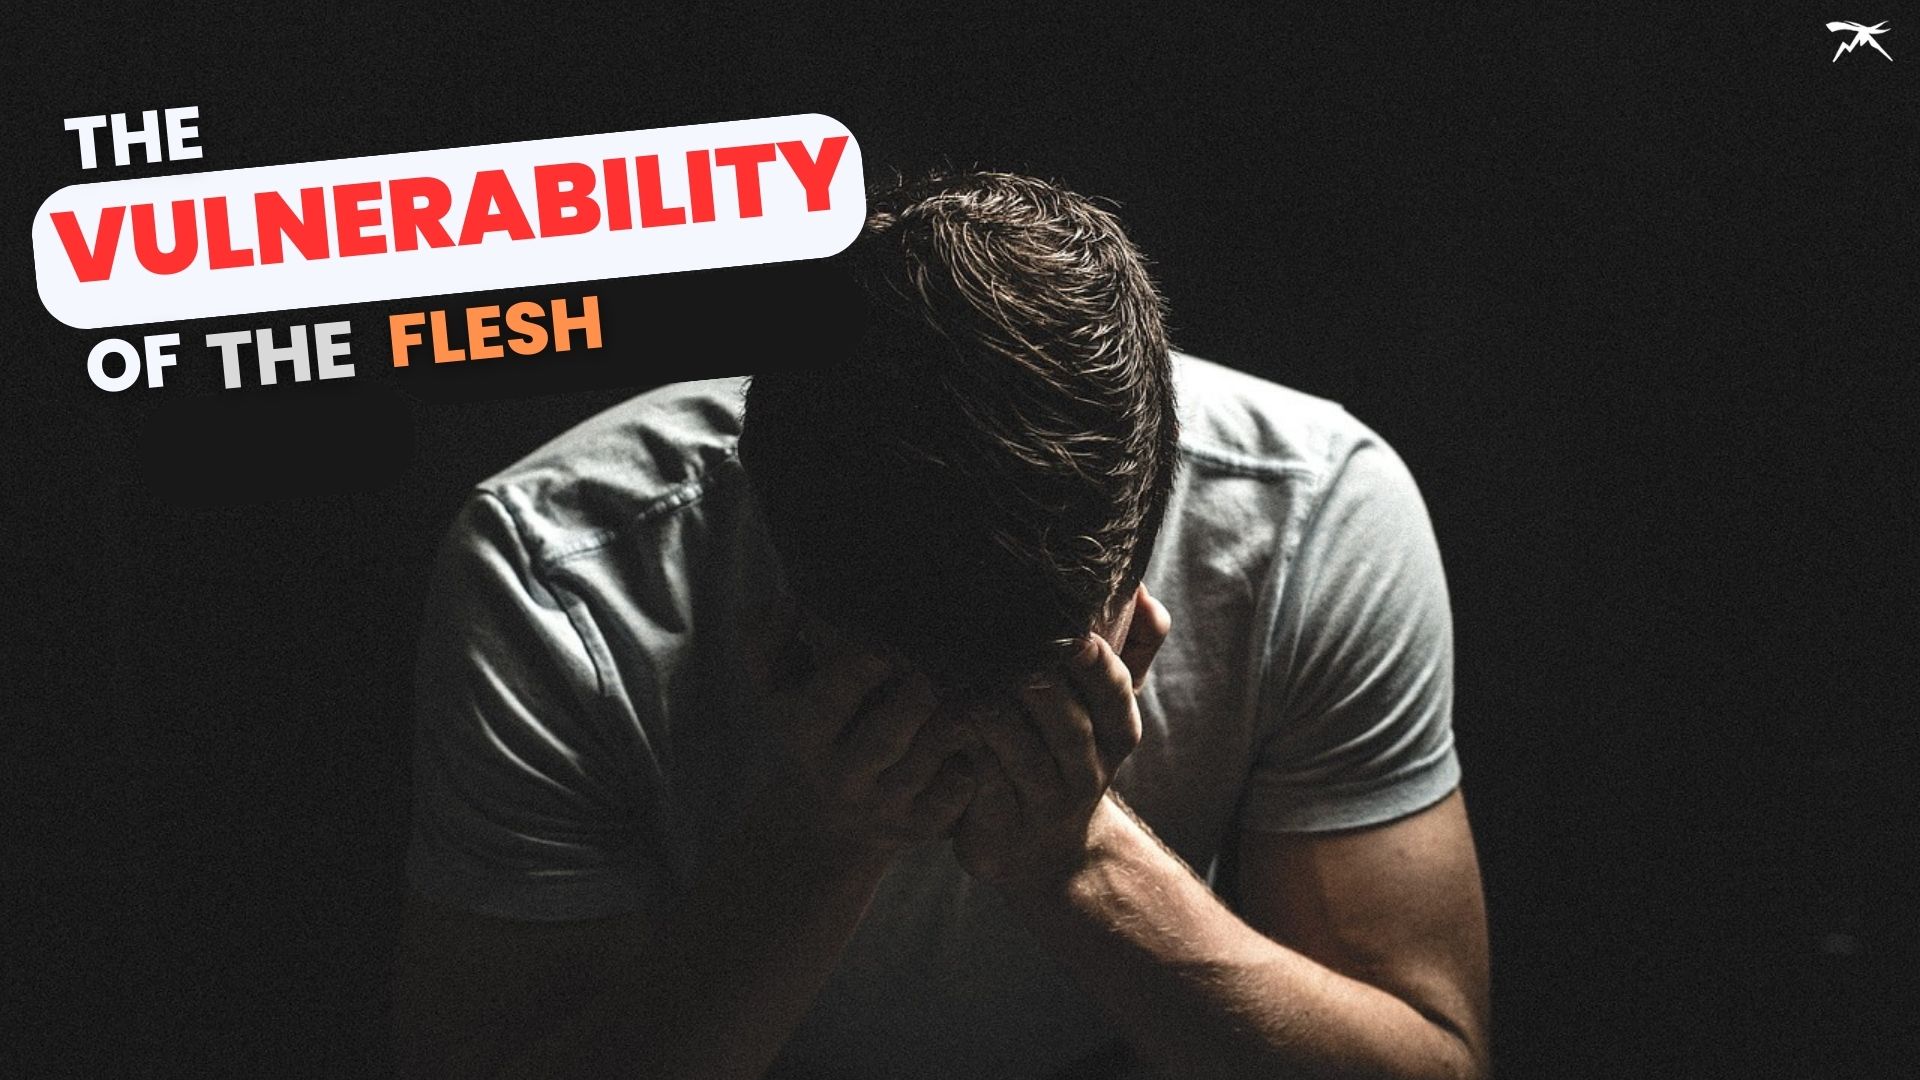 The Vulnerability of The Flesh: How Do You FUNCTION In Discipleship